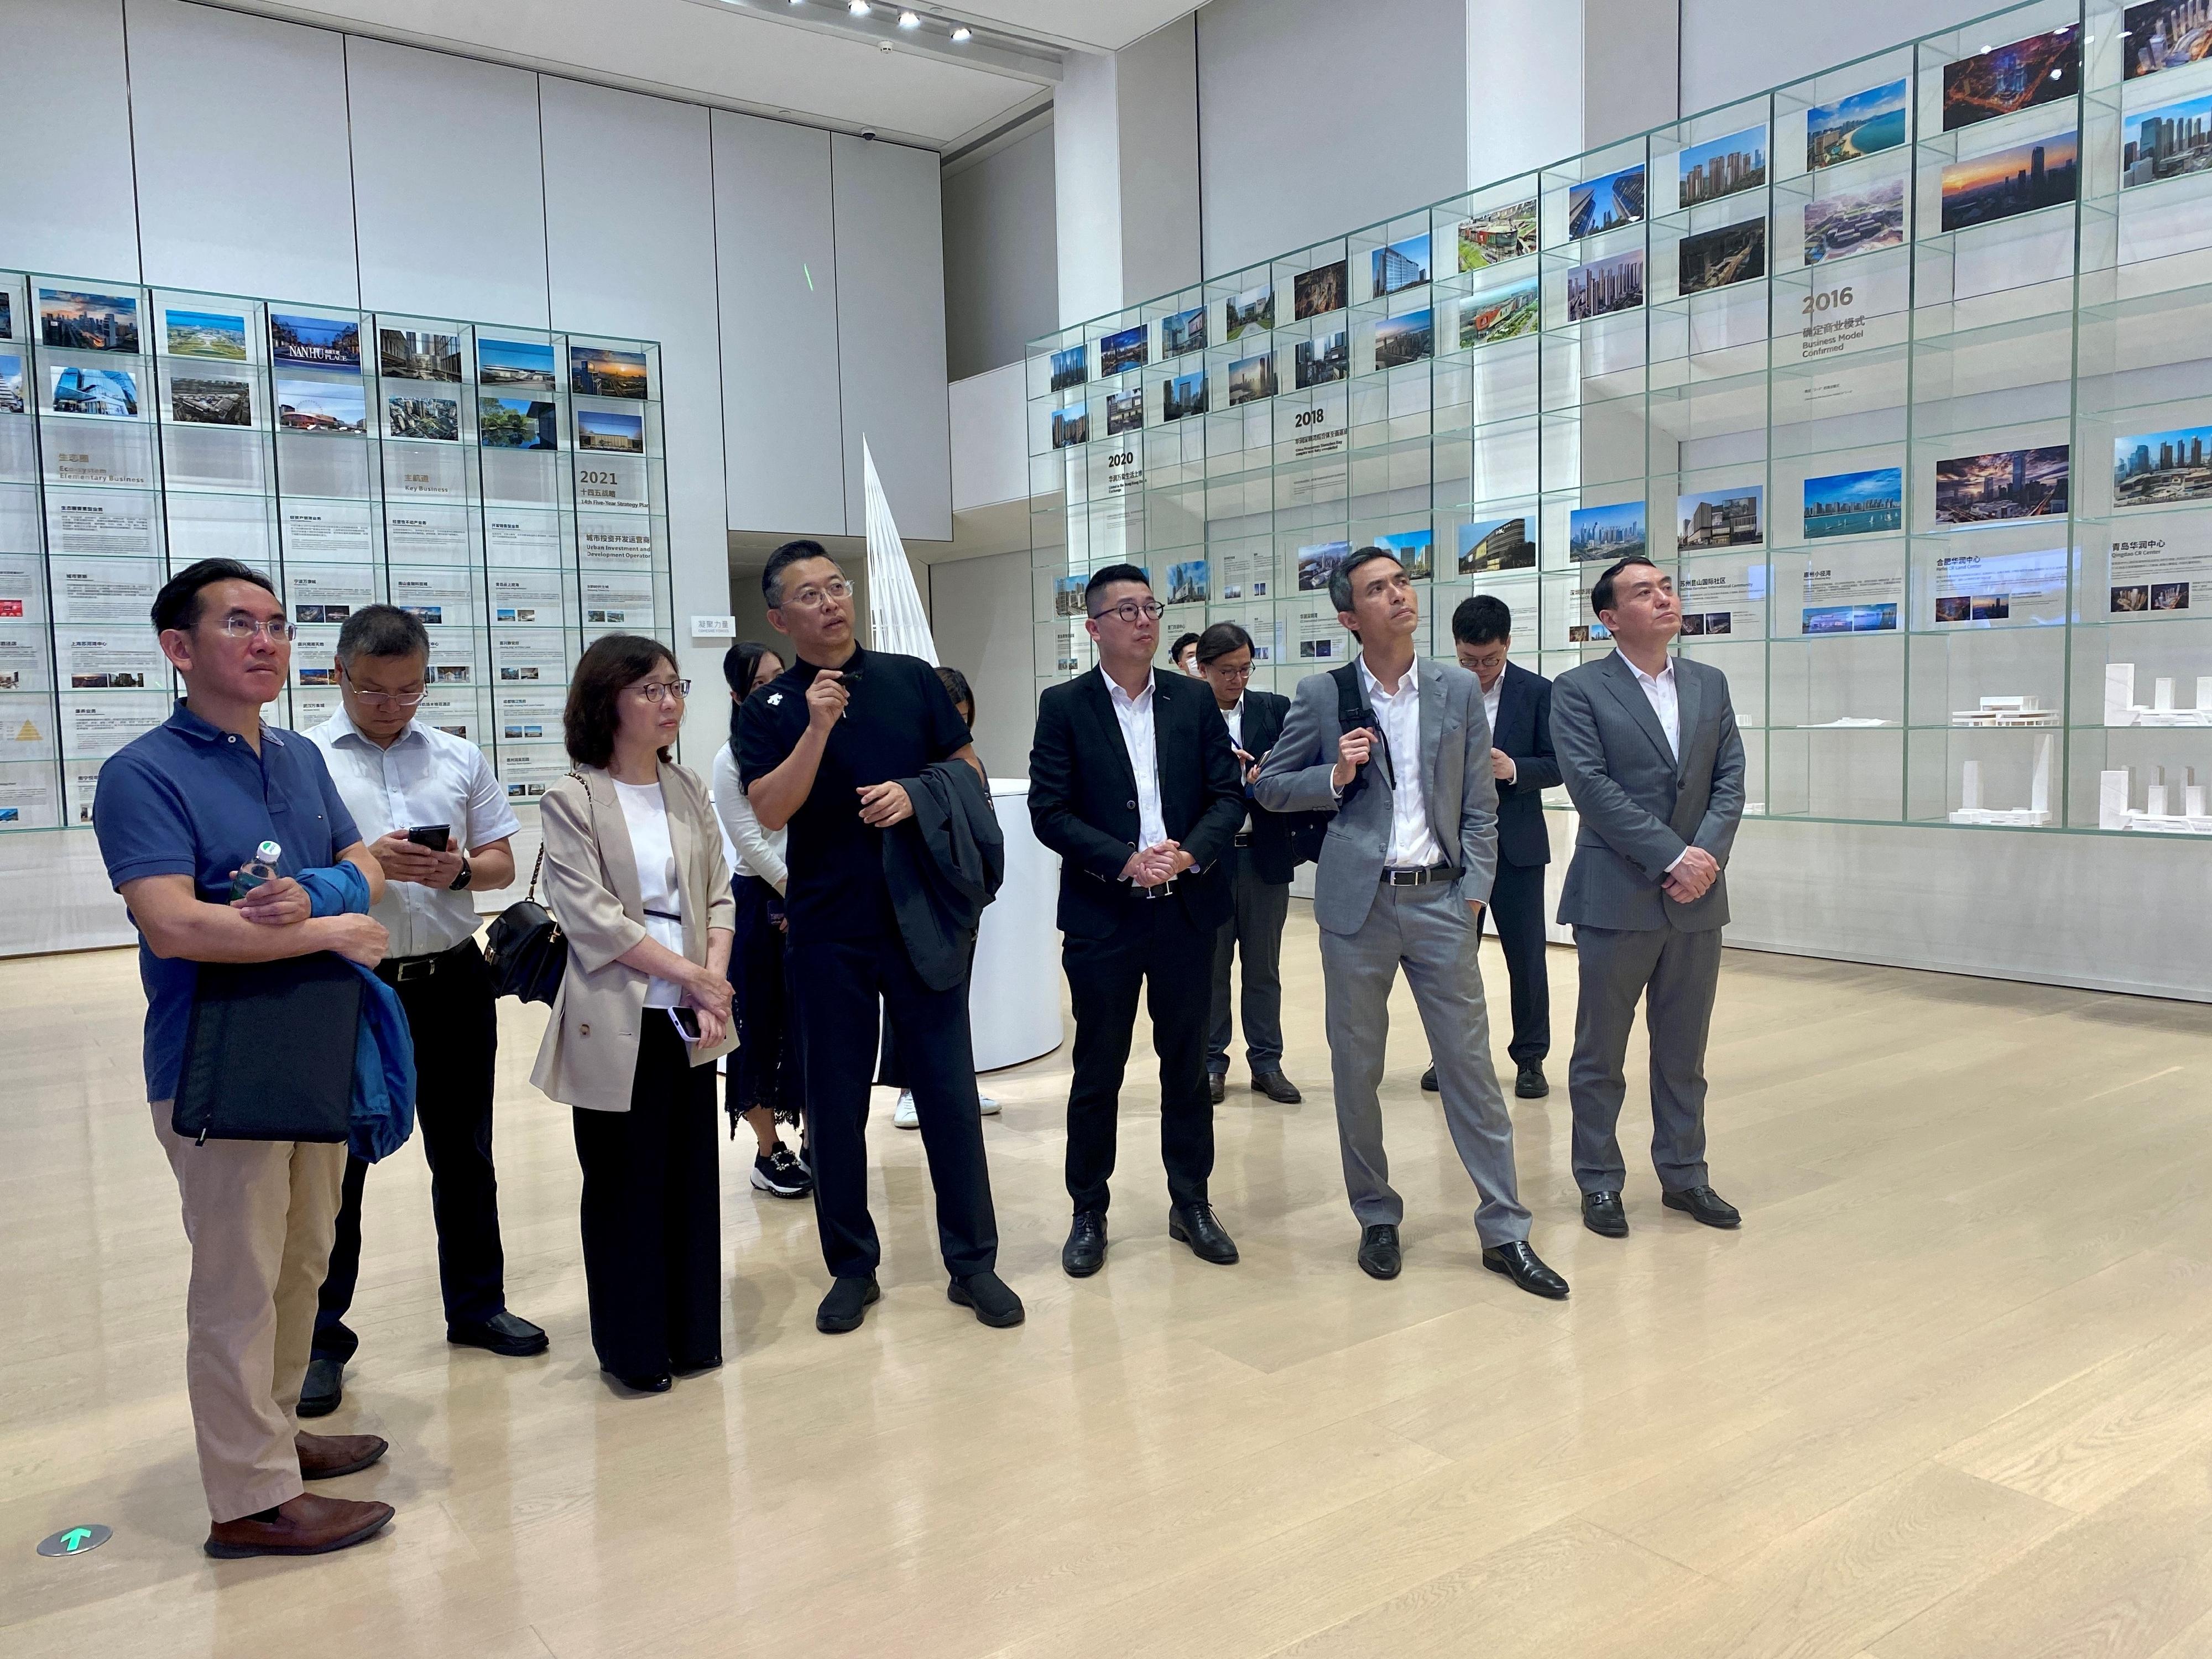 The Secretary for Development, Ms Bernadette Linn, today (June 1) visited Nanshan District in Shenzhen to inspect the development and implementation of local districts in the area. Photo shows Ms Linn (third left); the Under Secretary for Development, Mr David Lam (first left); and the Director of the Preparatory Office for Northern Metropolis, Mr Vic Yau (second right), visiting an exhibition hall of a local district developer and being briefed on its business development.